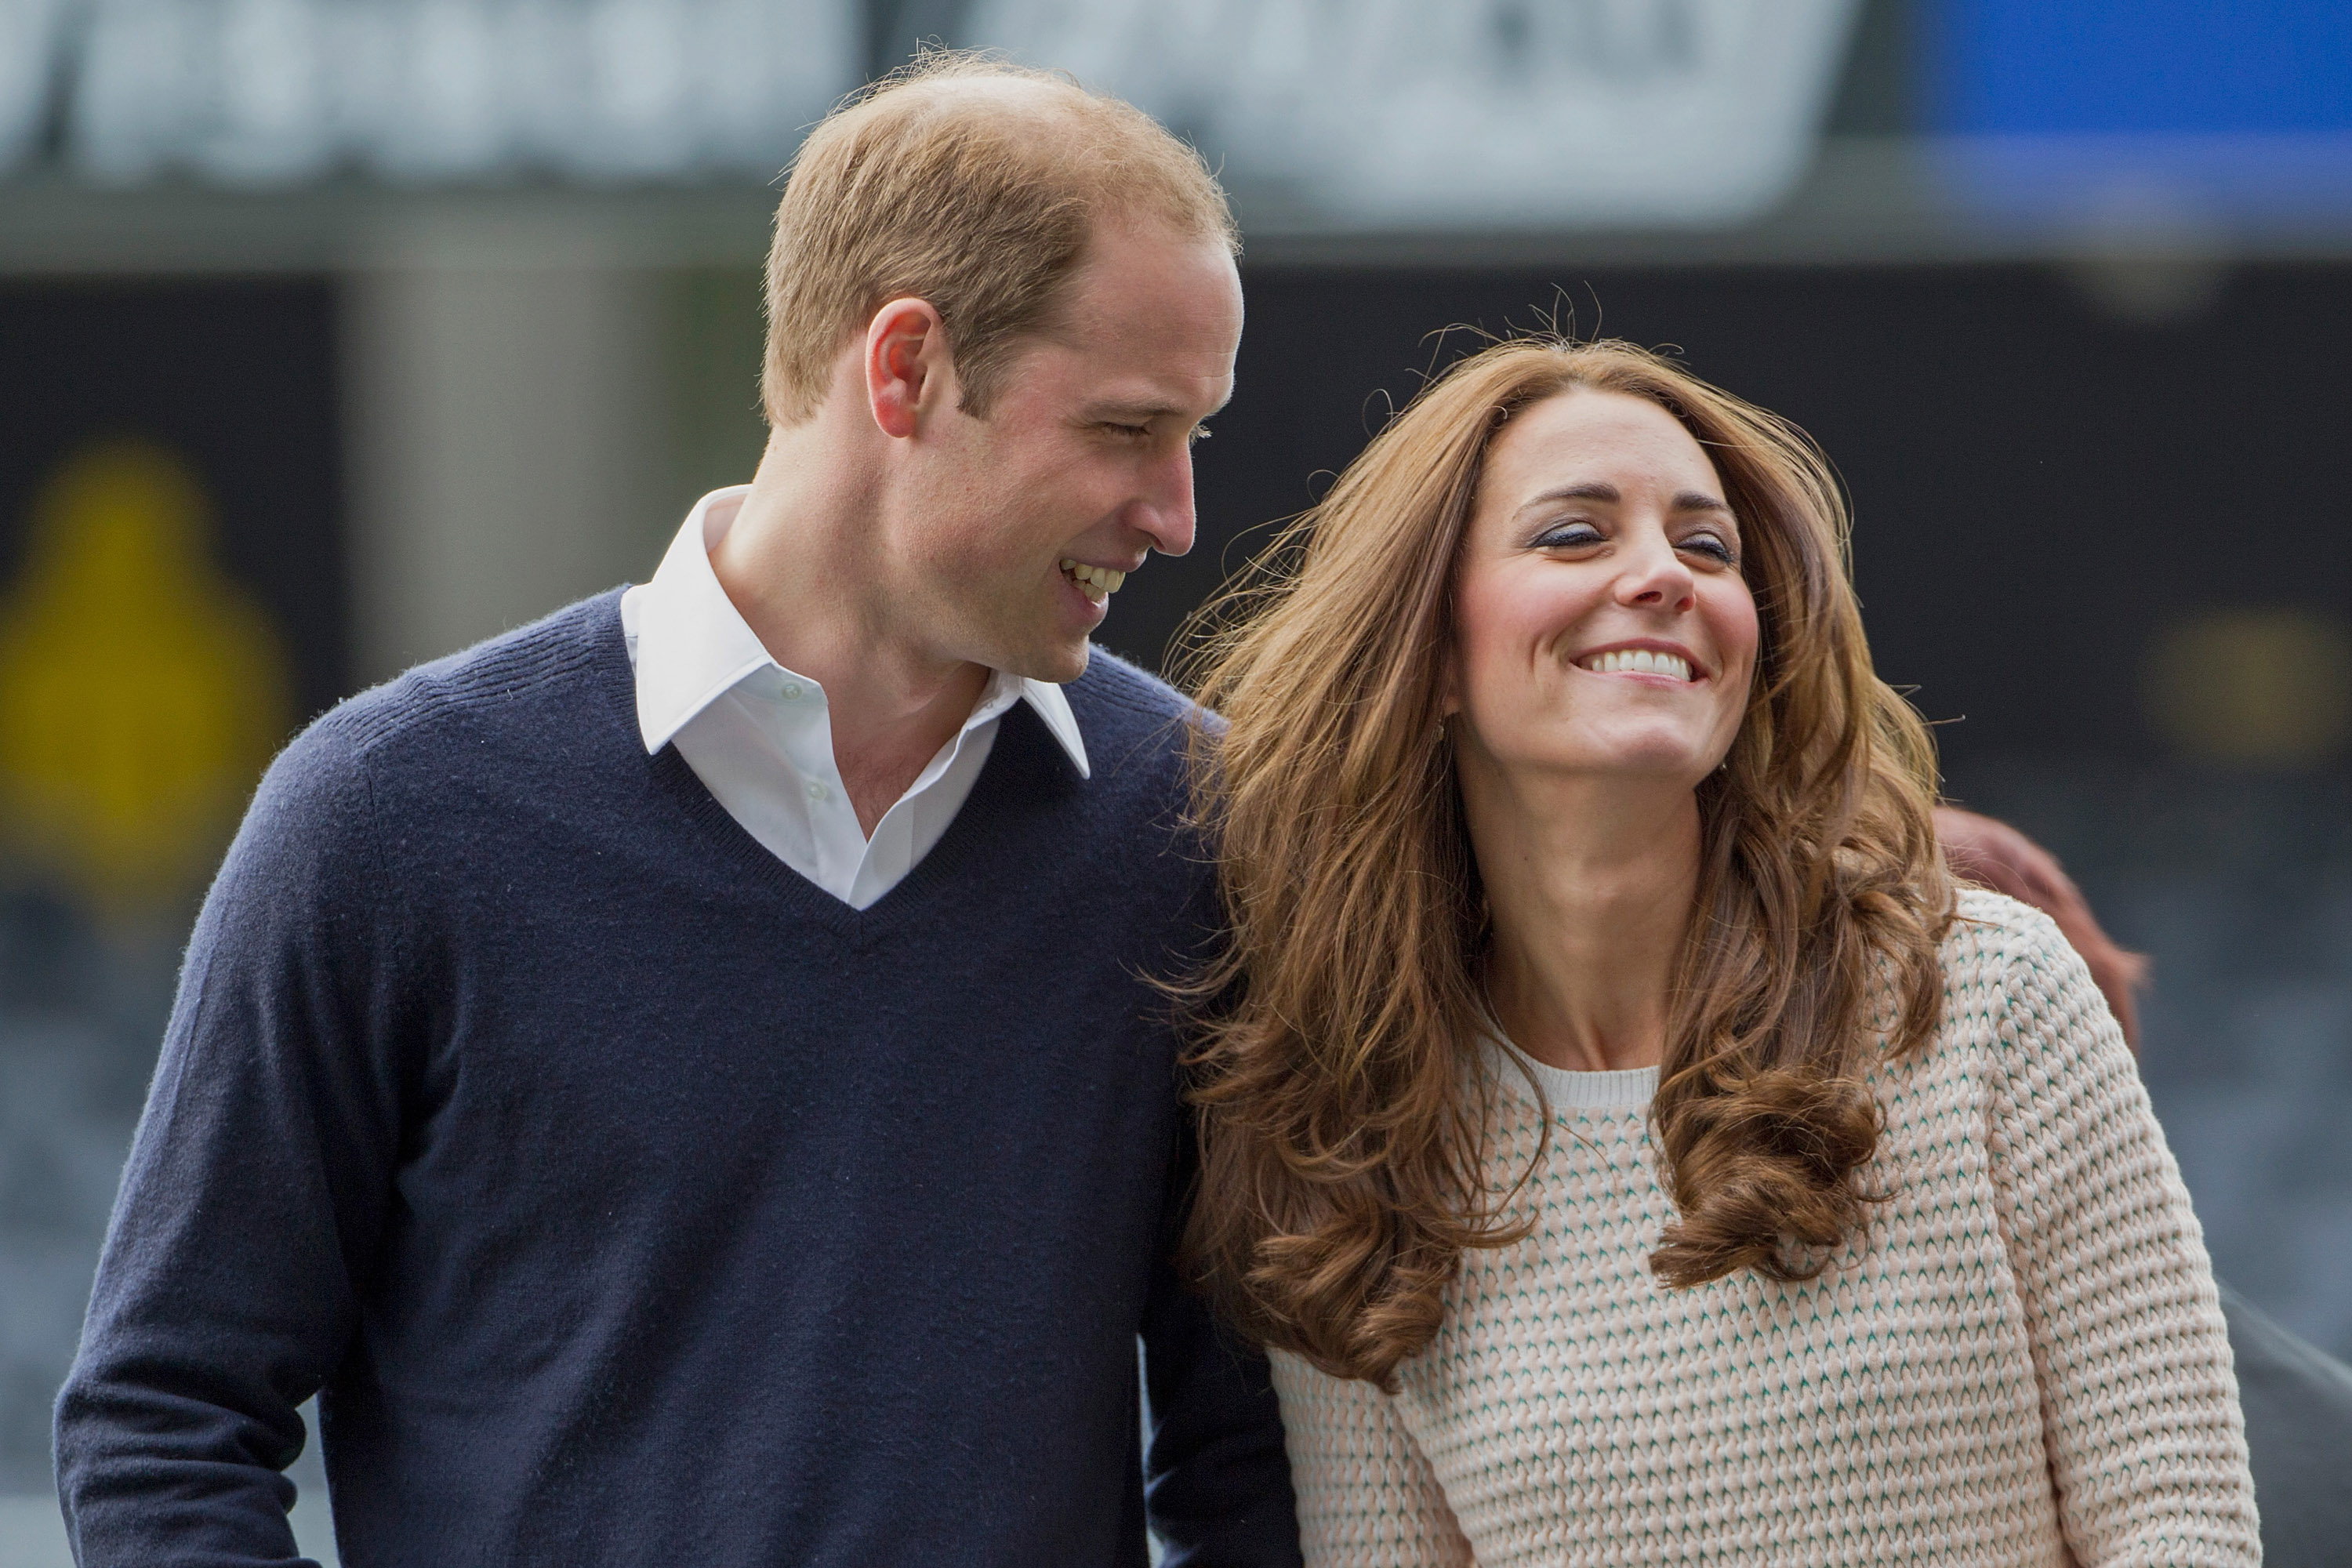 Prince William and Kate Middleton smiling as they attend 'Rippa Rugby' in the Forstyth Barr Stadium